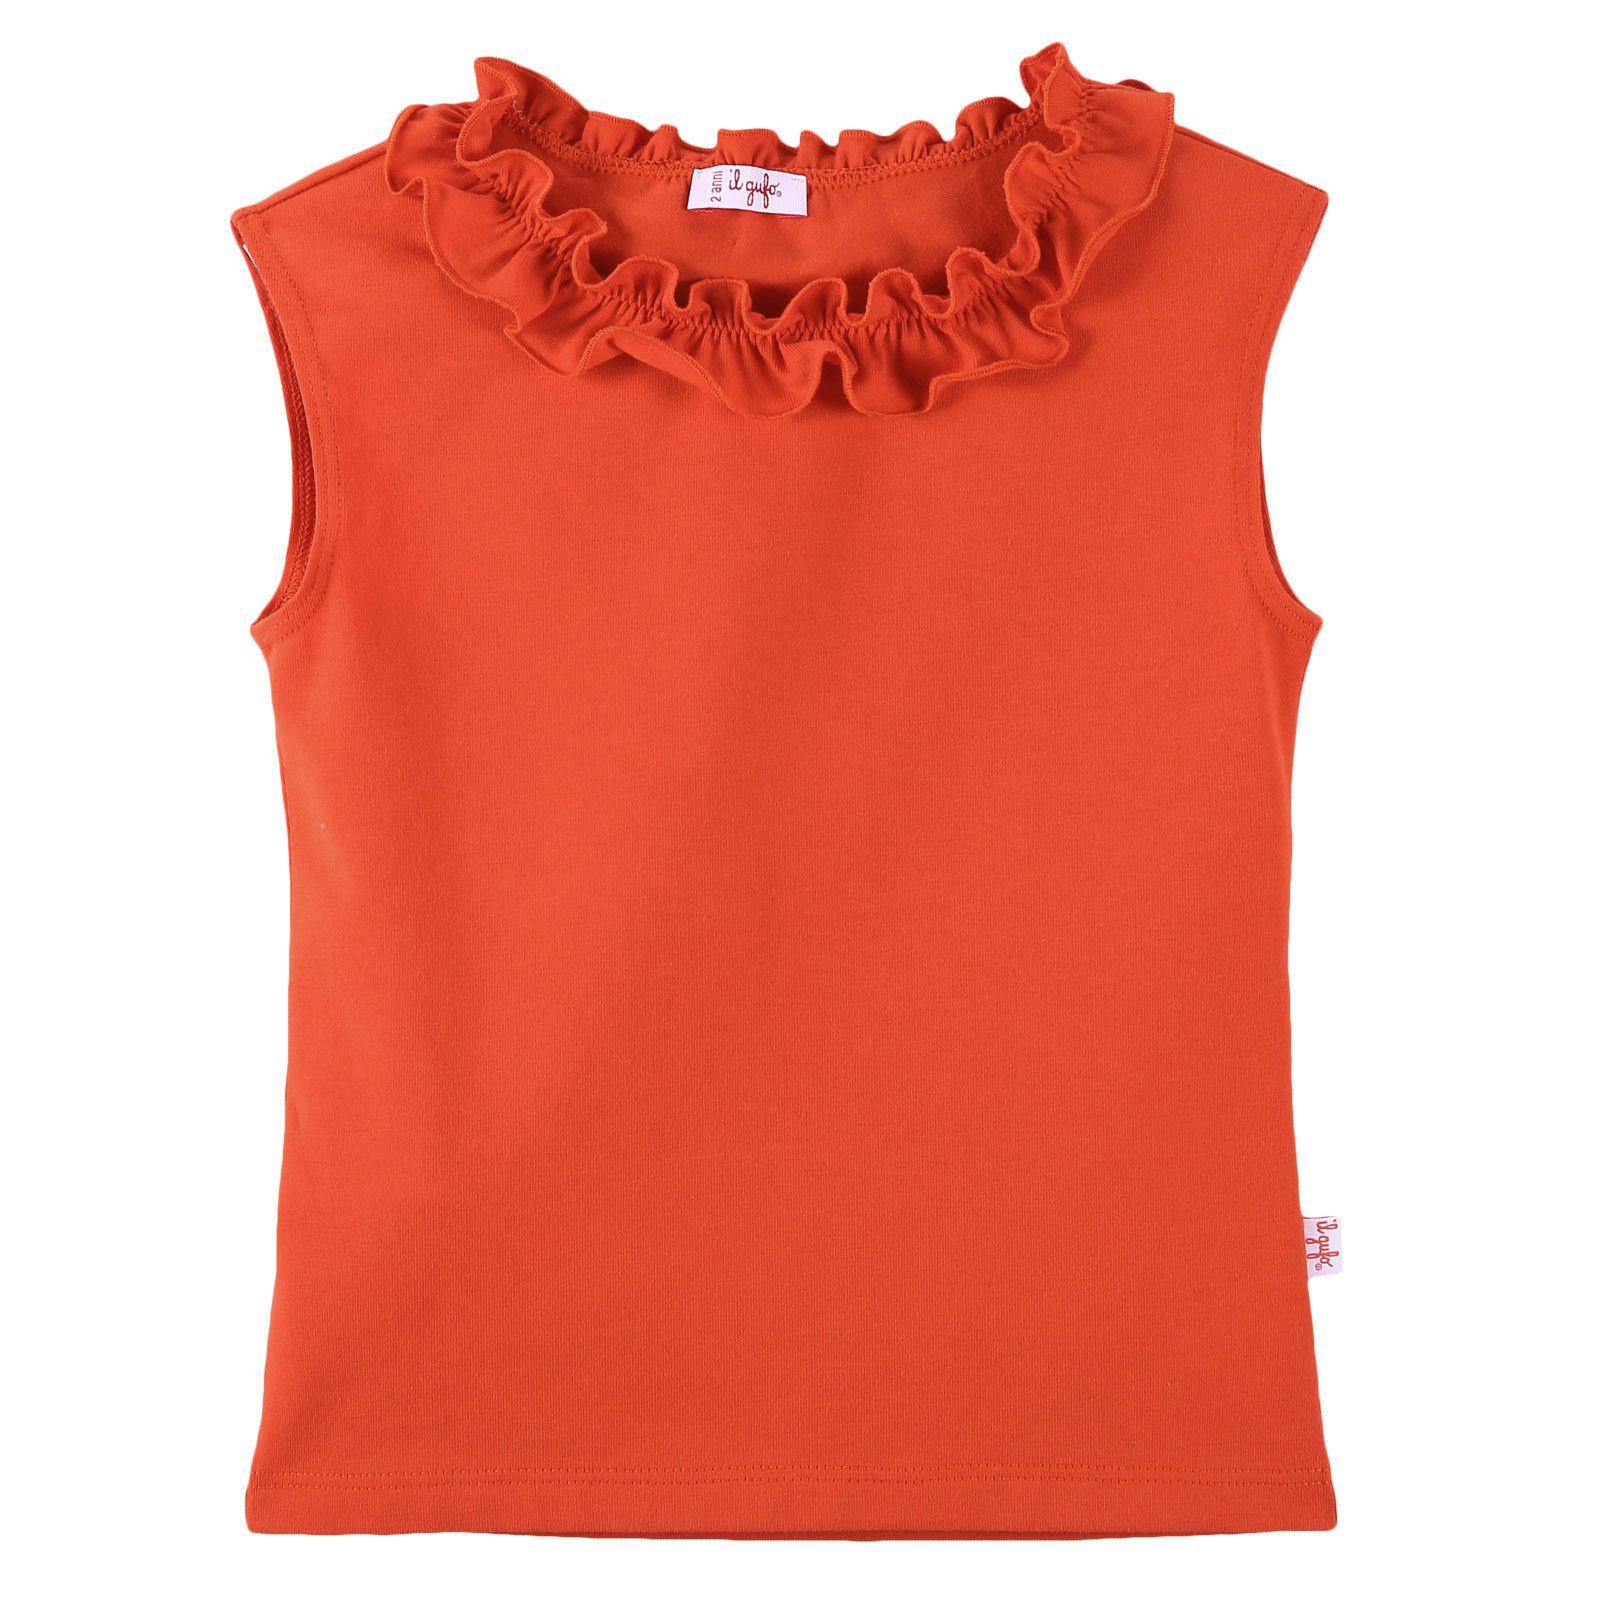 Girls Red Cotton T-Shirt With Lace Collar - CÉMAROSE | Children's Fashion Store - 1